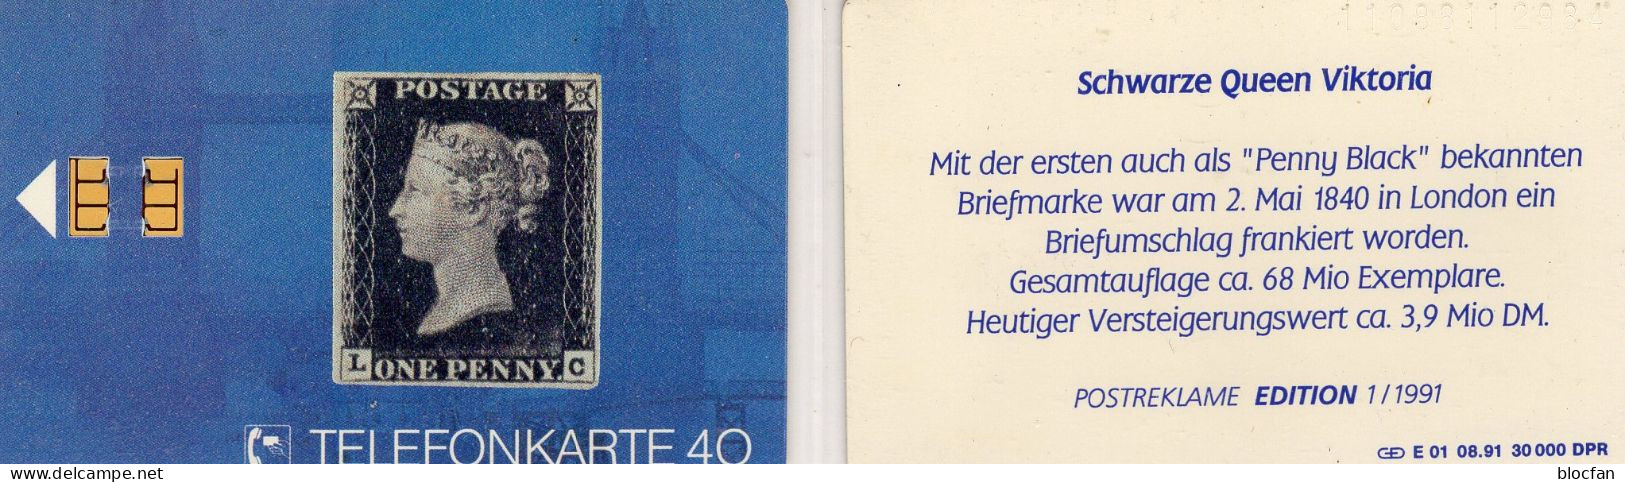 Penny Black 1840 TK E01/1991 30.000 Expl.** 25€ Edition 1 Schwarze Queen Victoria  TC History Stamp On Phonecard Germany - E-Series : D. Postreklame Edition